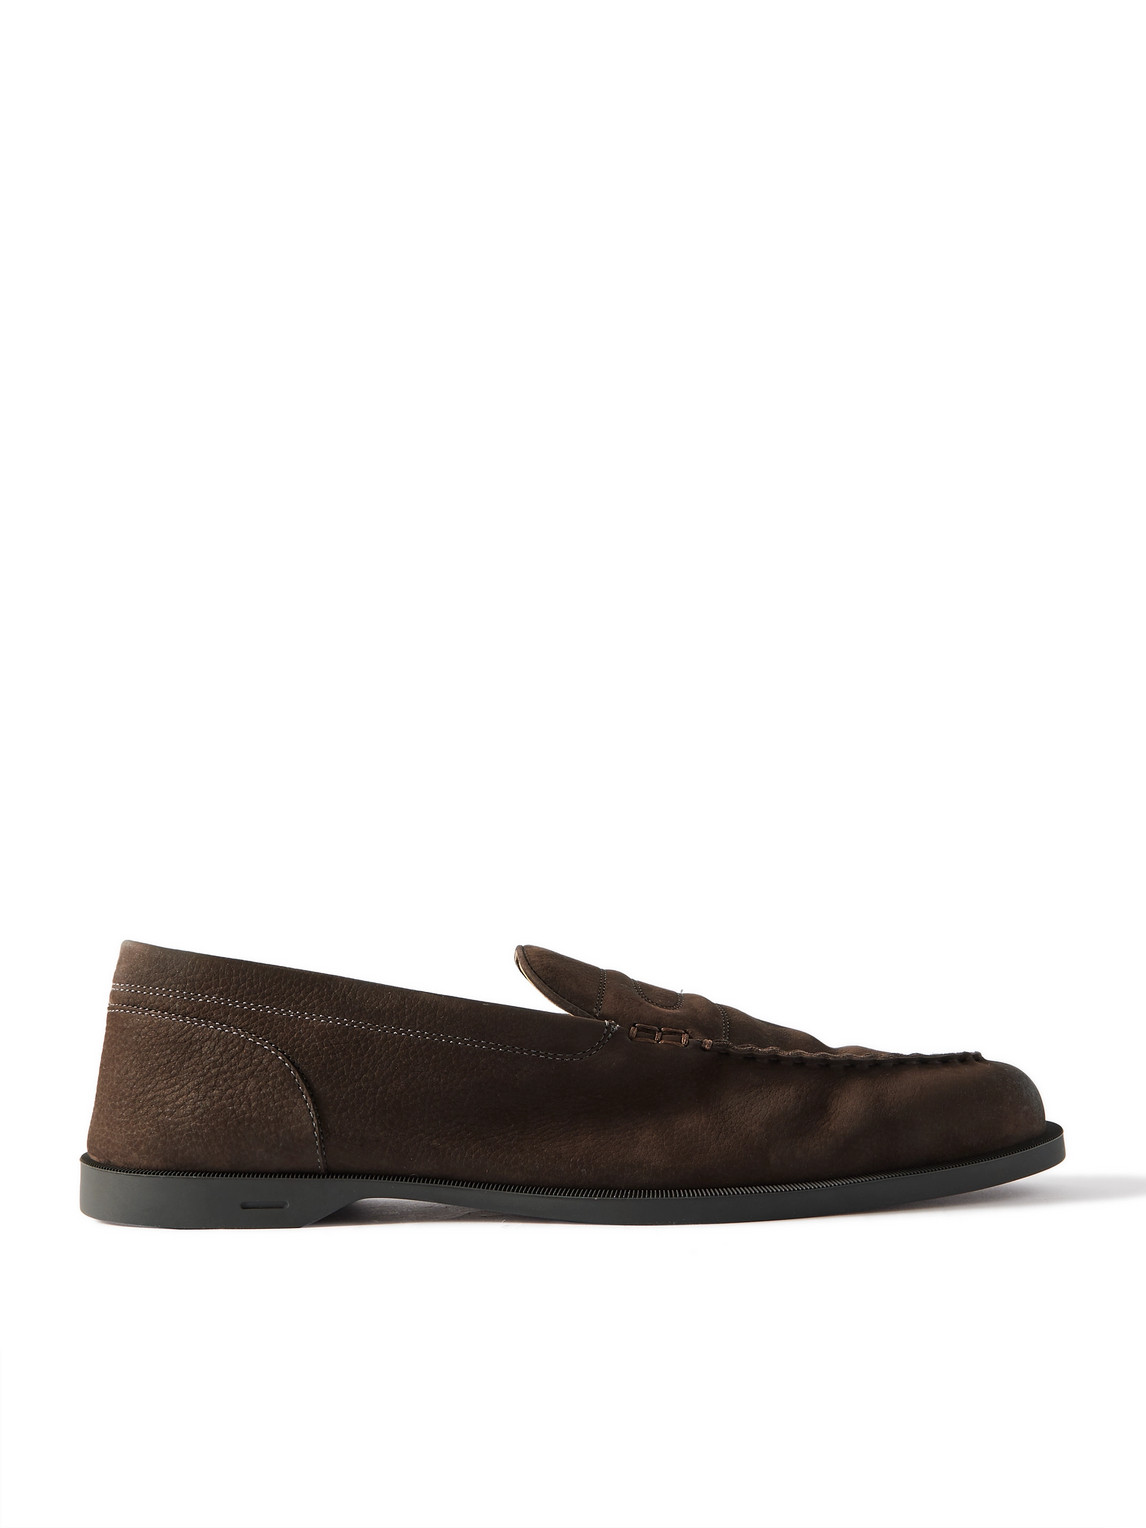 Pace Full-Grain Nubuck Loafers